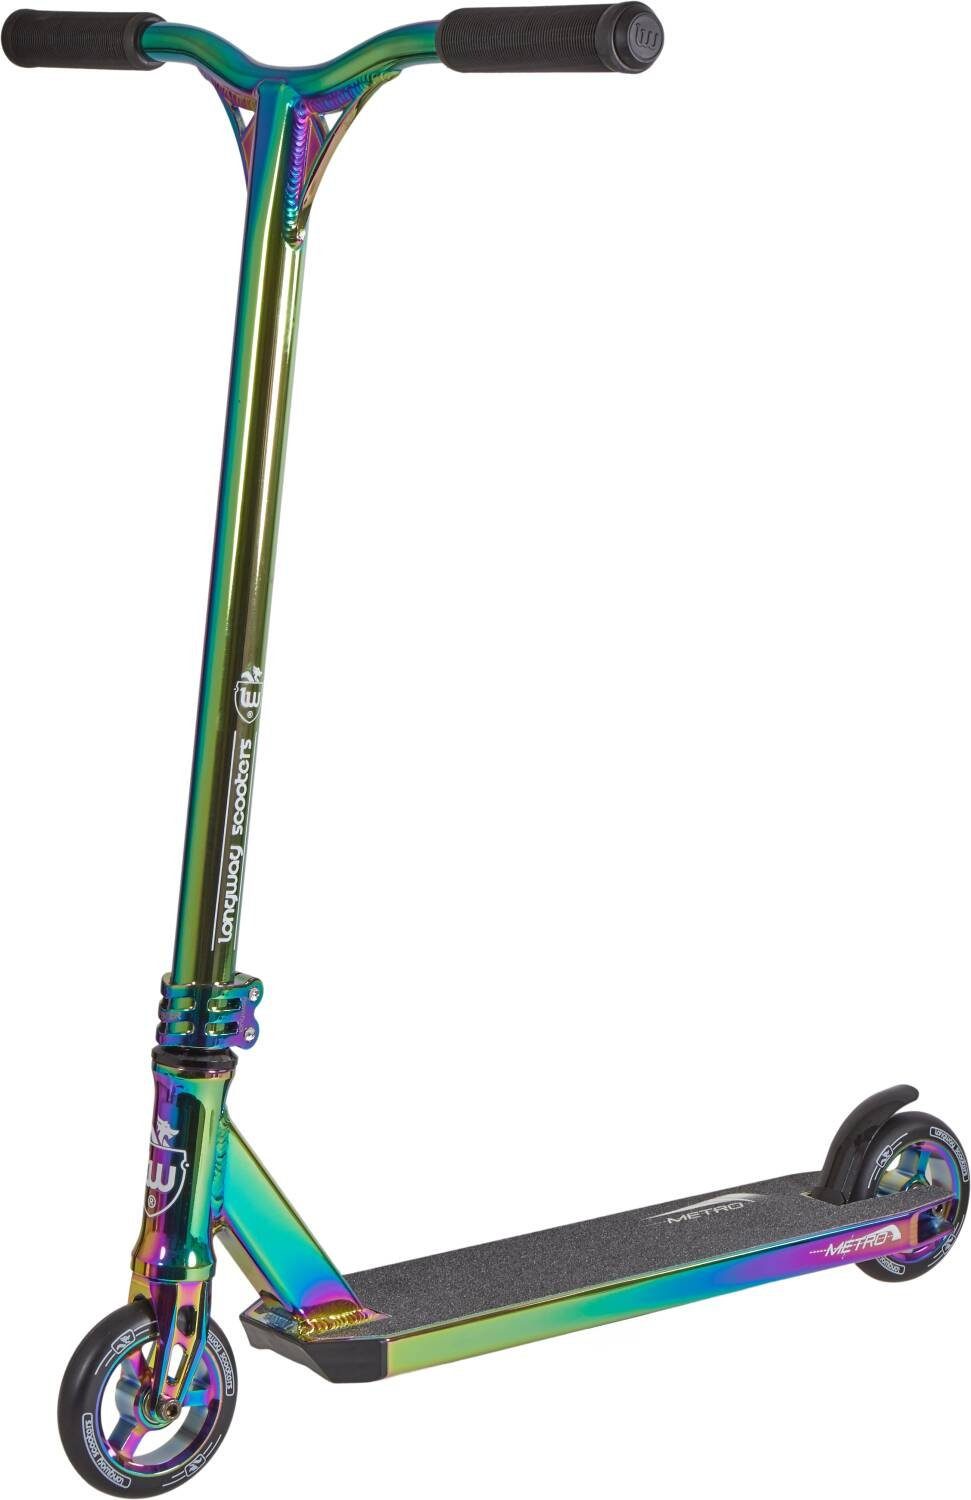 2K19 + Stunt-Scooter Stuntscooter F26 Griptape Longway Neochrome Scooters Full Longway H=79cm Metro